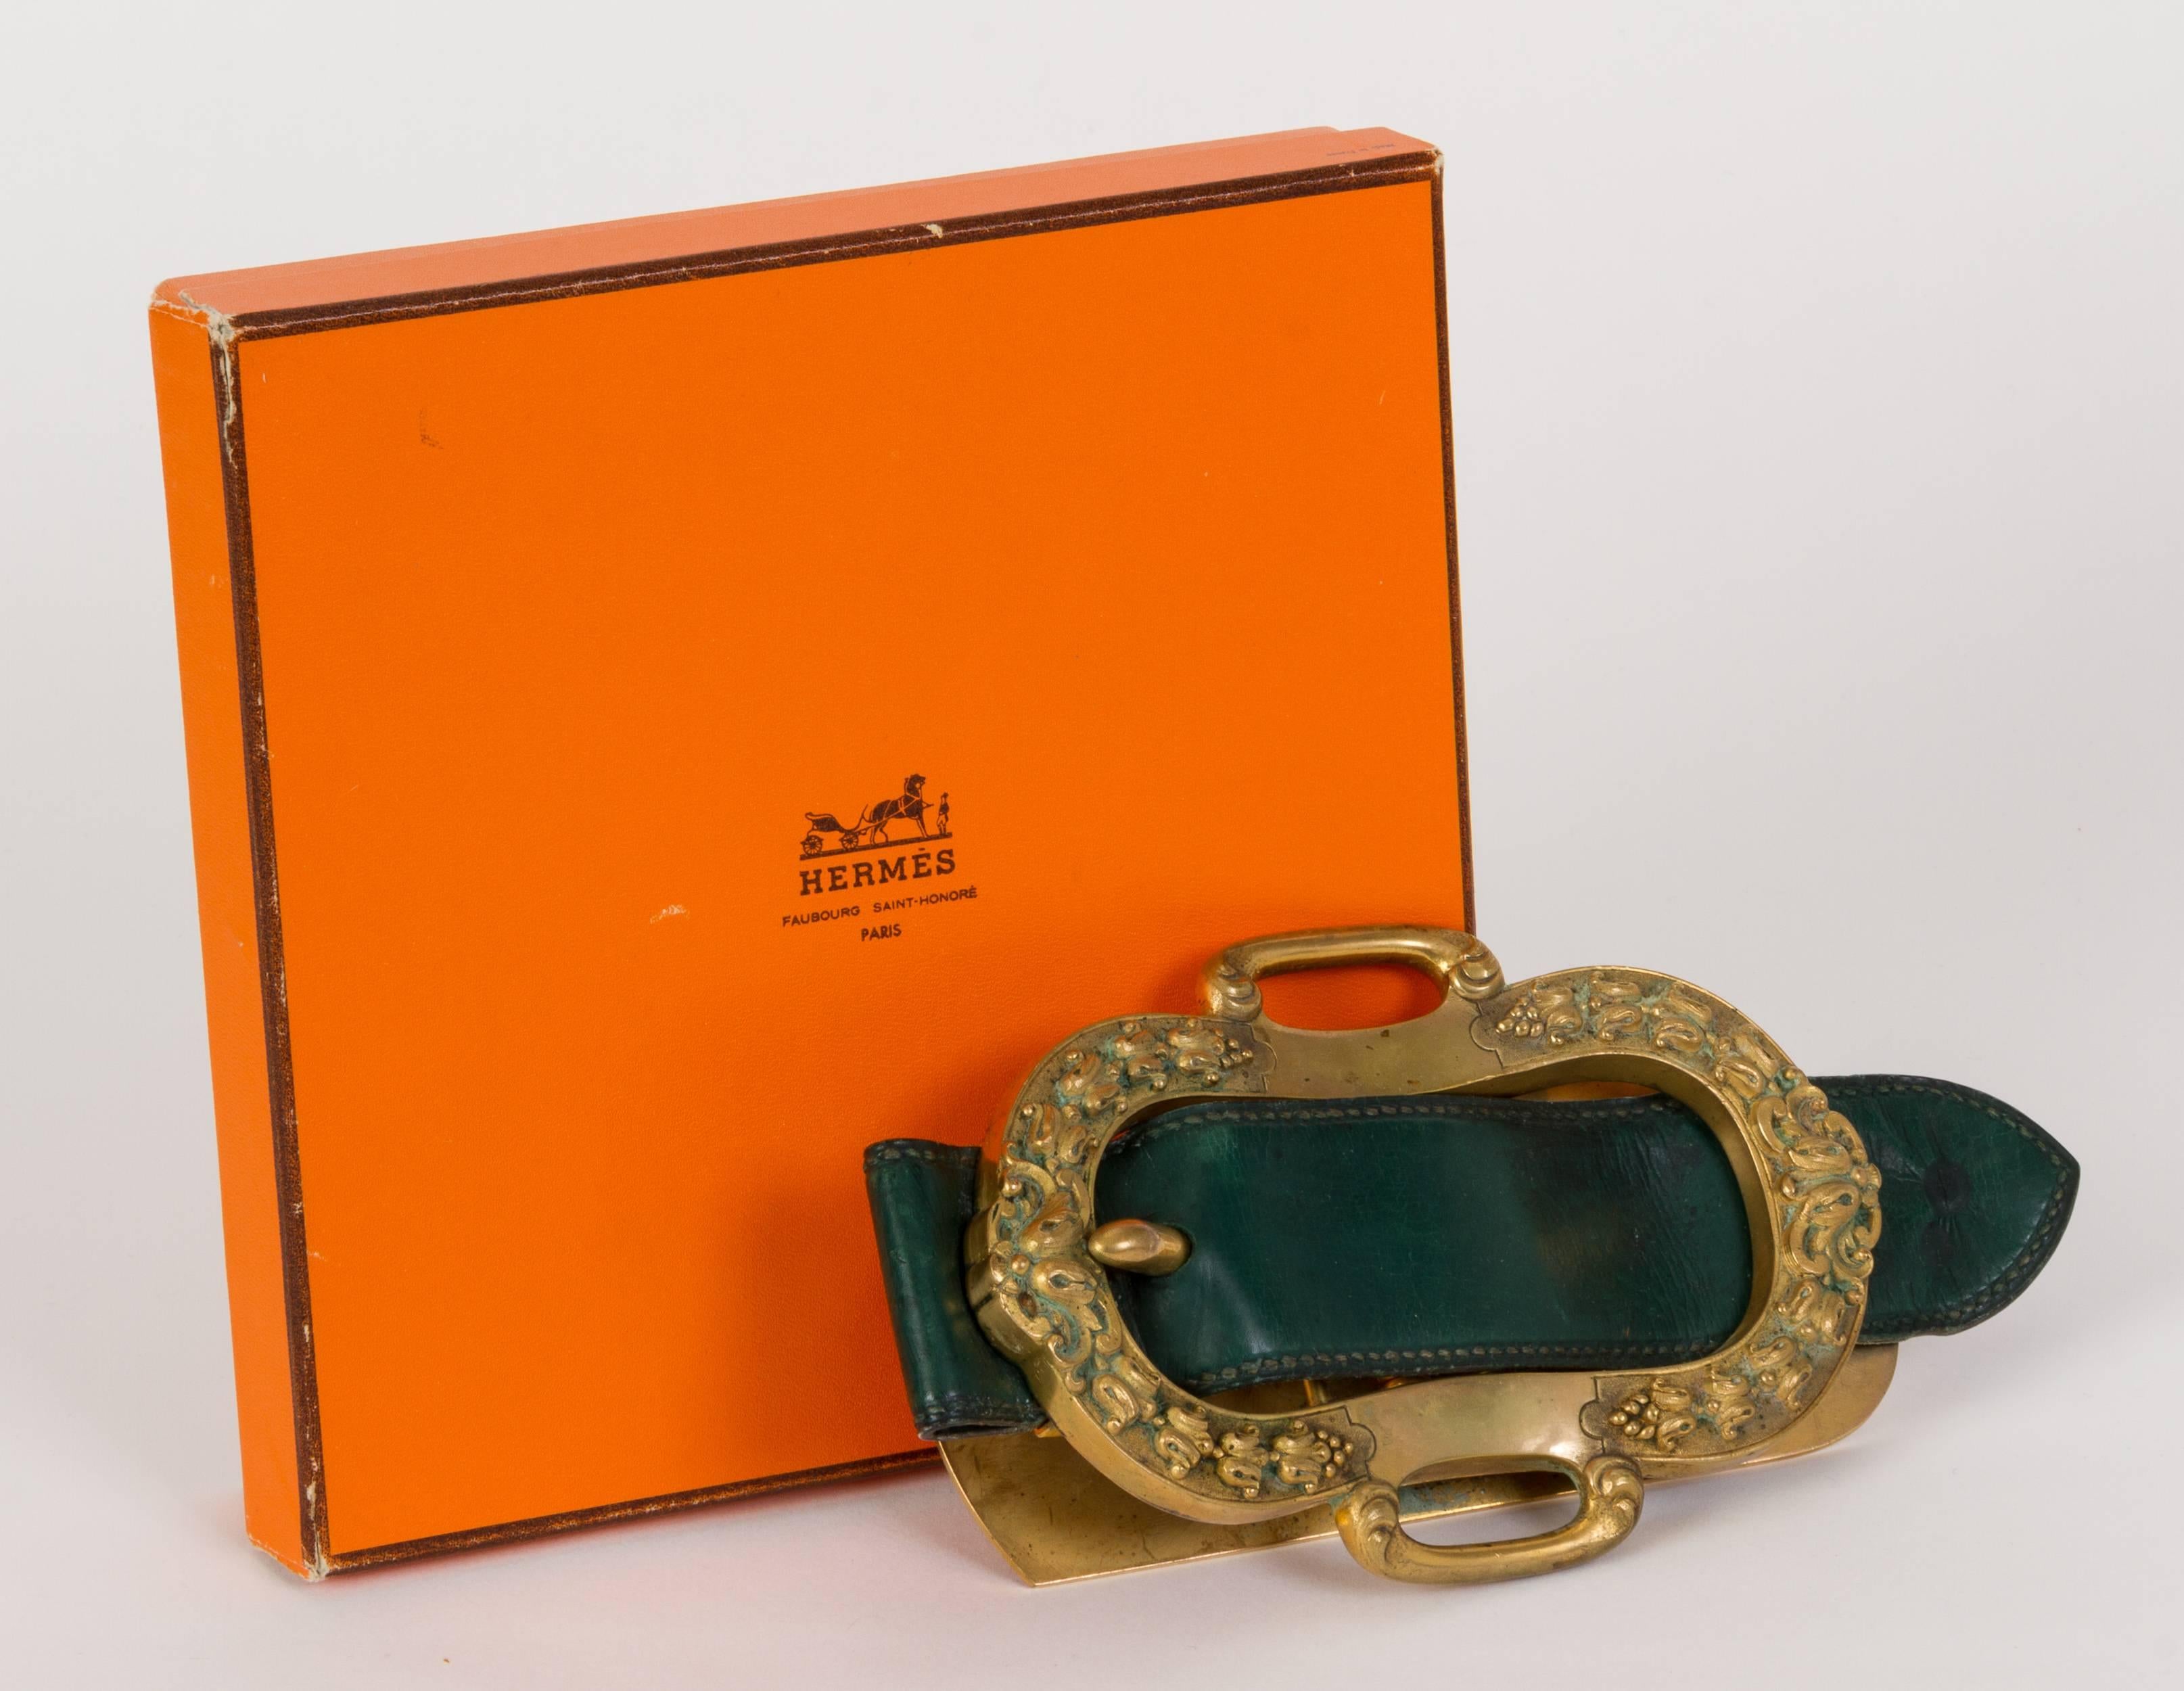 Hermès rare oversize paperweight/mail clip. Forest green leather and brass metal. Stamped. Comes with original box.
